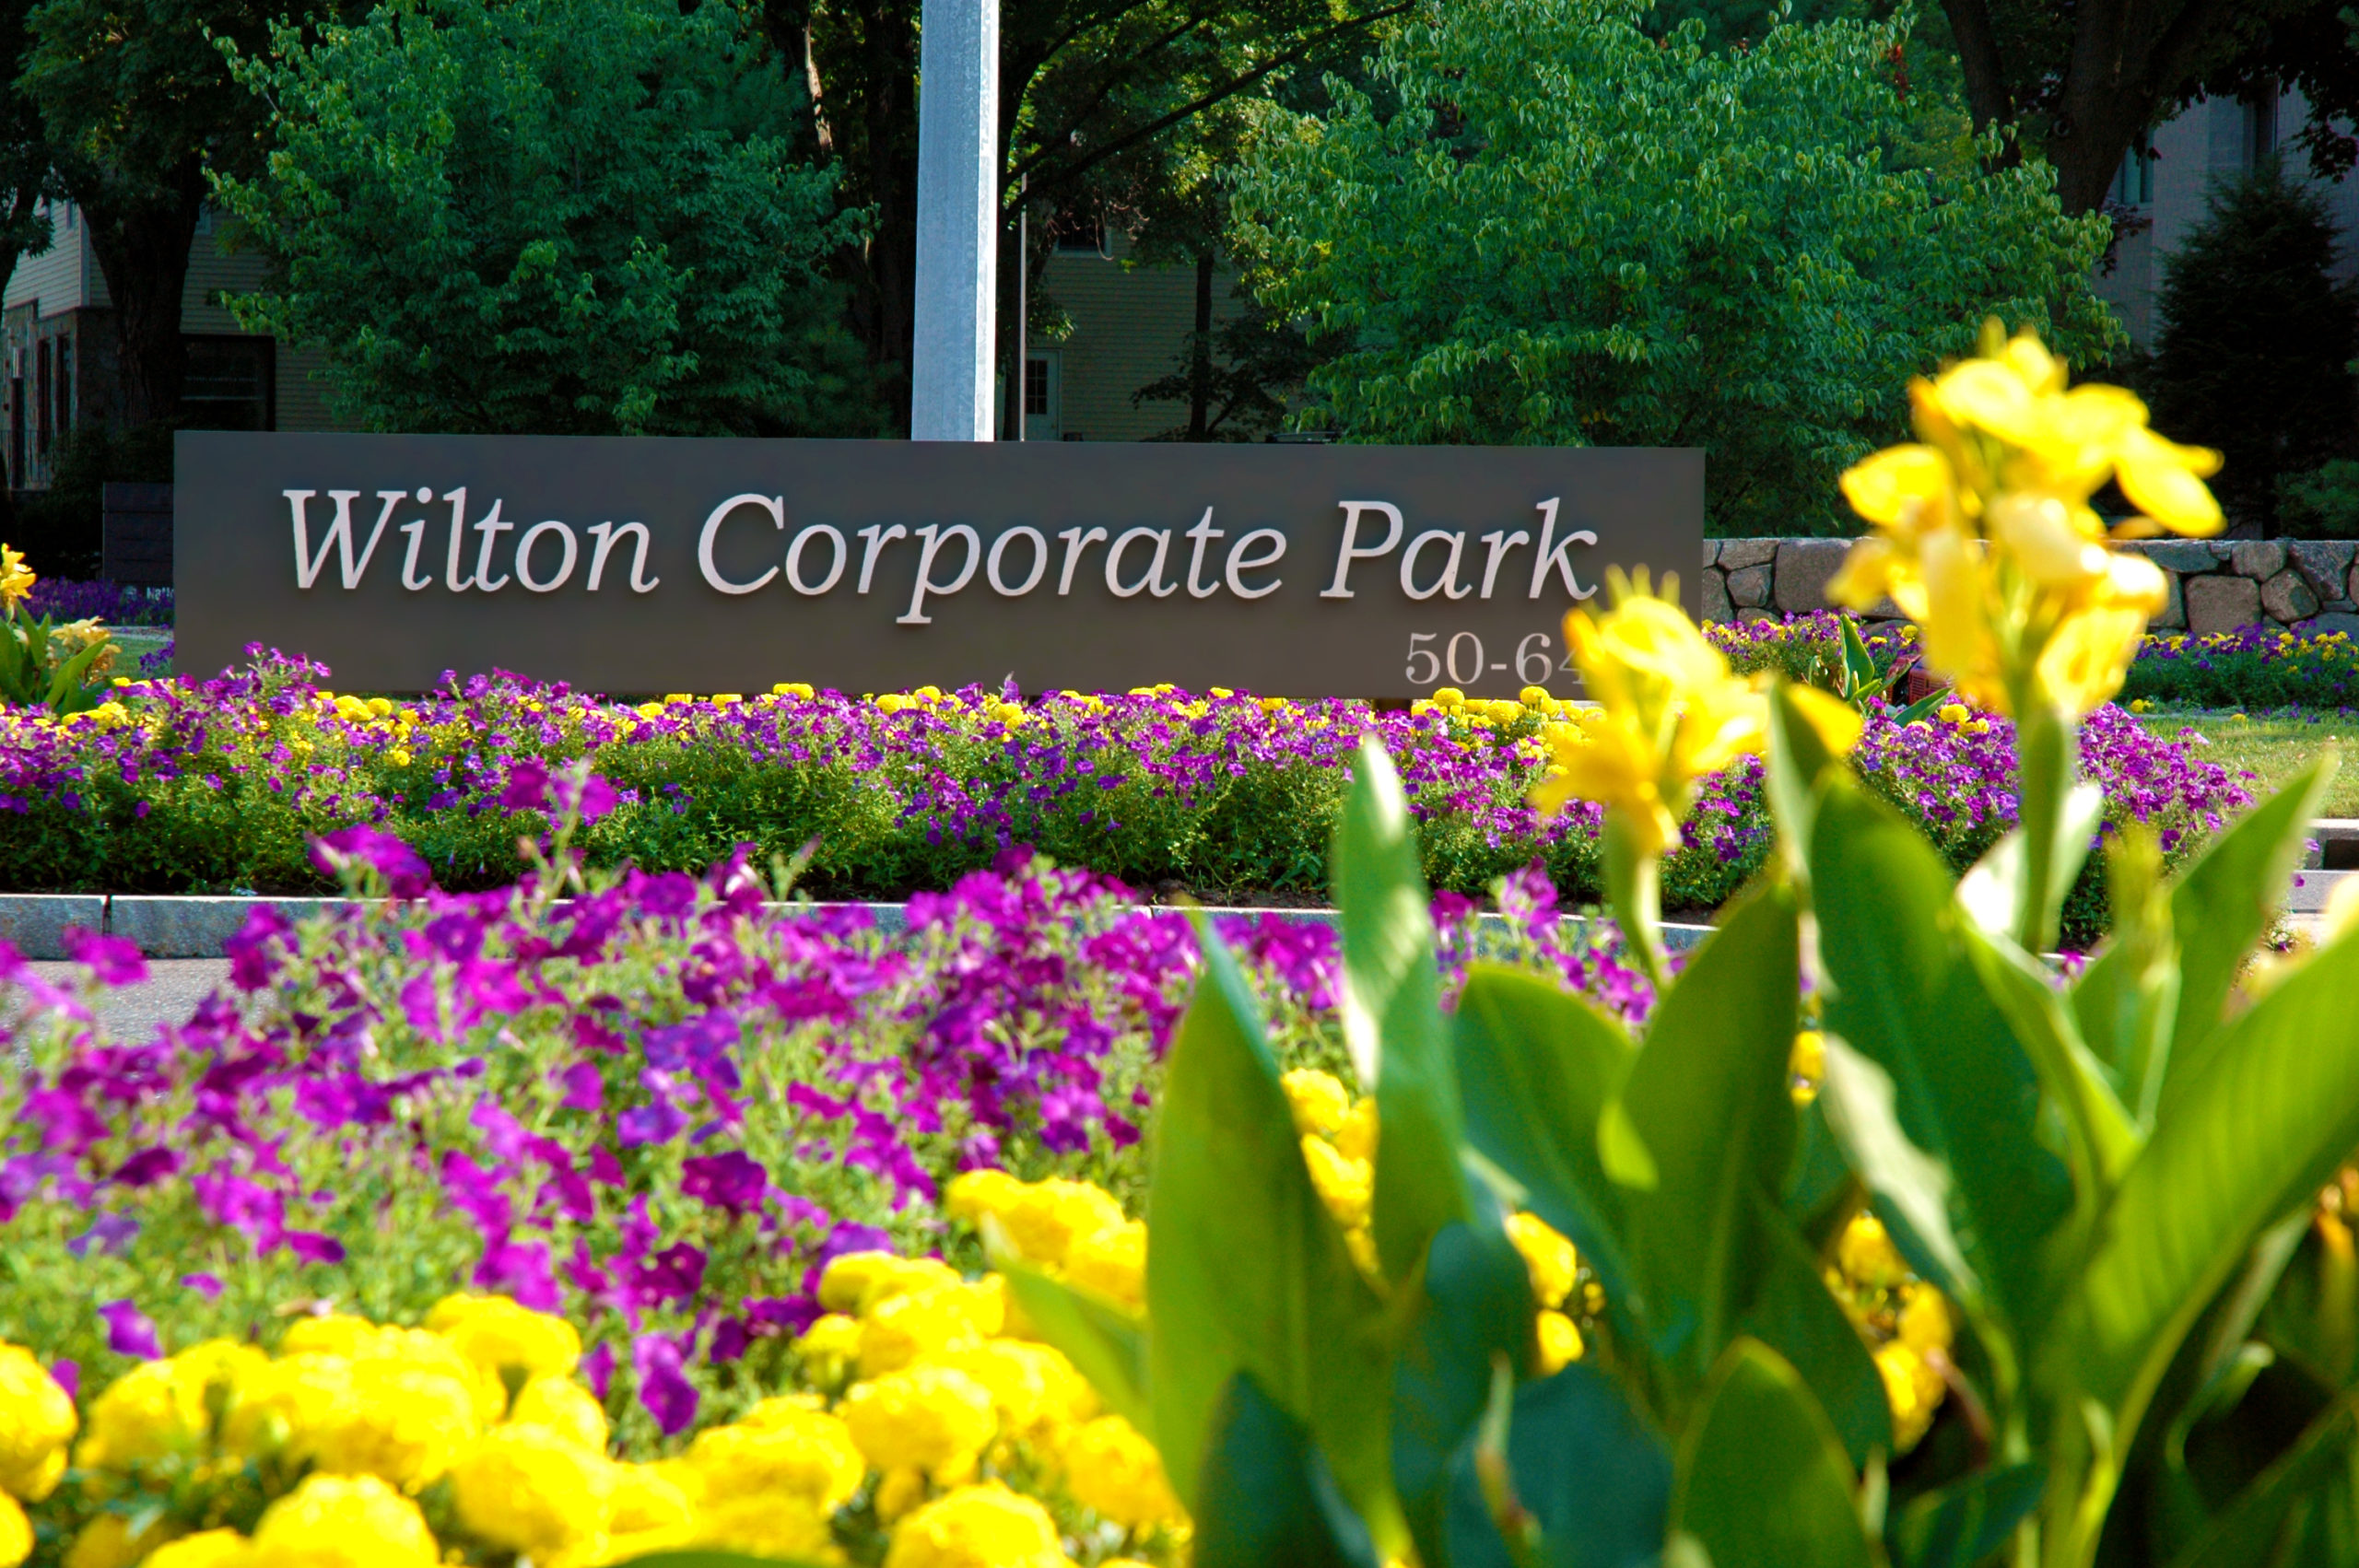 Landscaping Corporate Parks in CT/NY